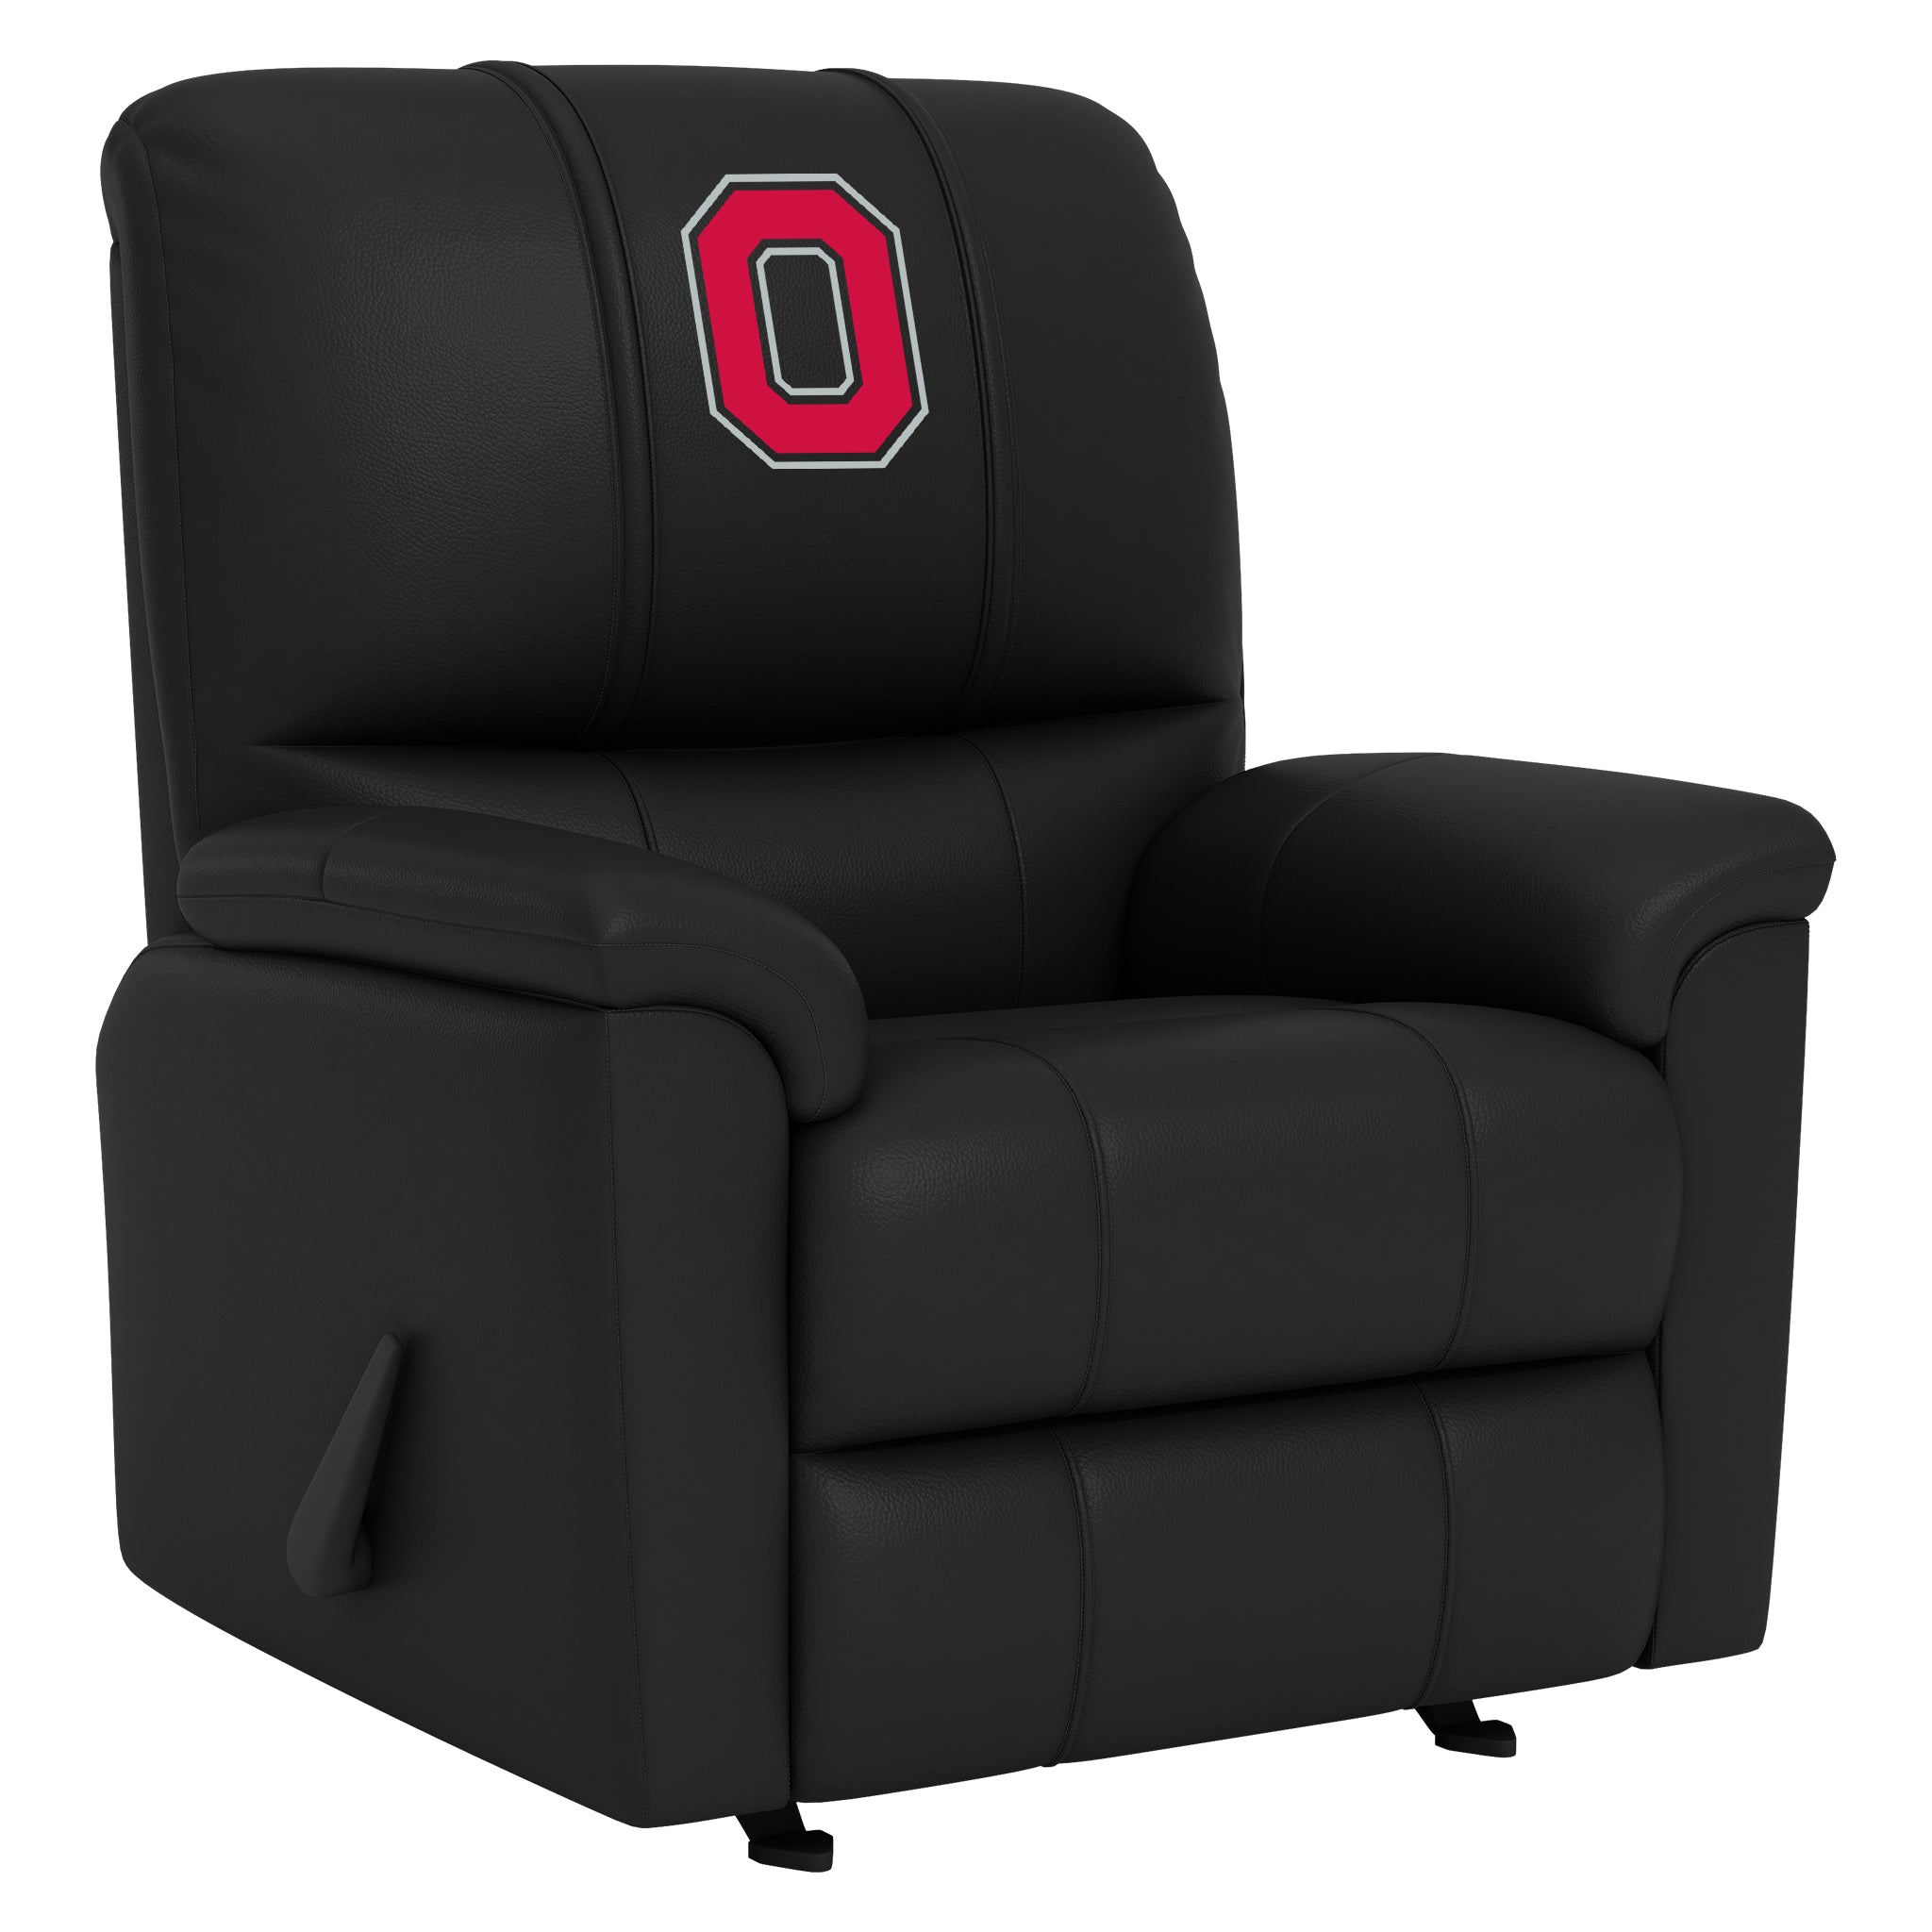 Ohio State Silver Club Chair with Ohio State Block O Logo